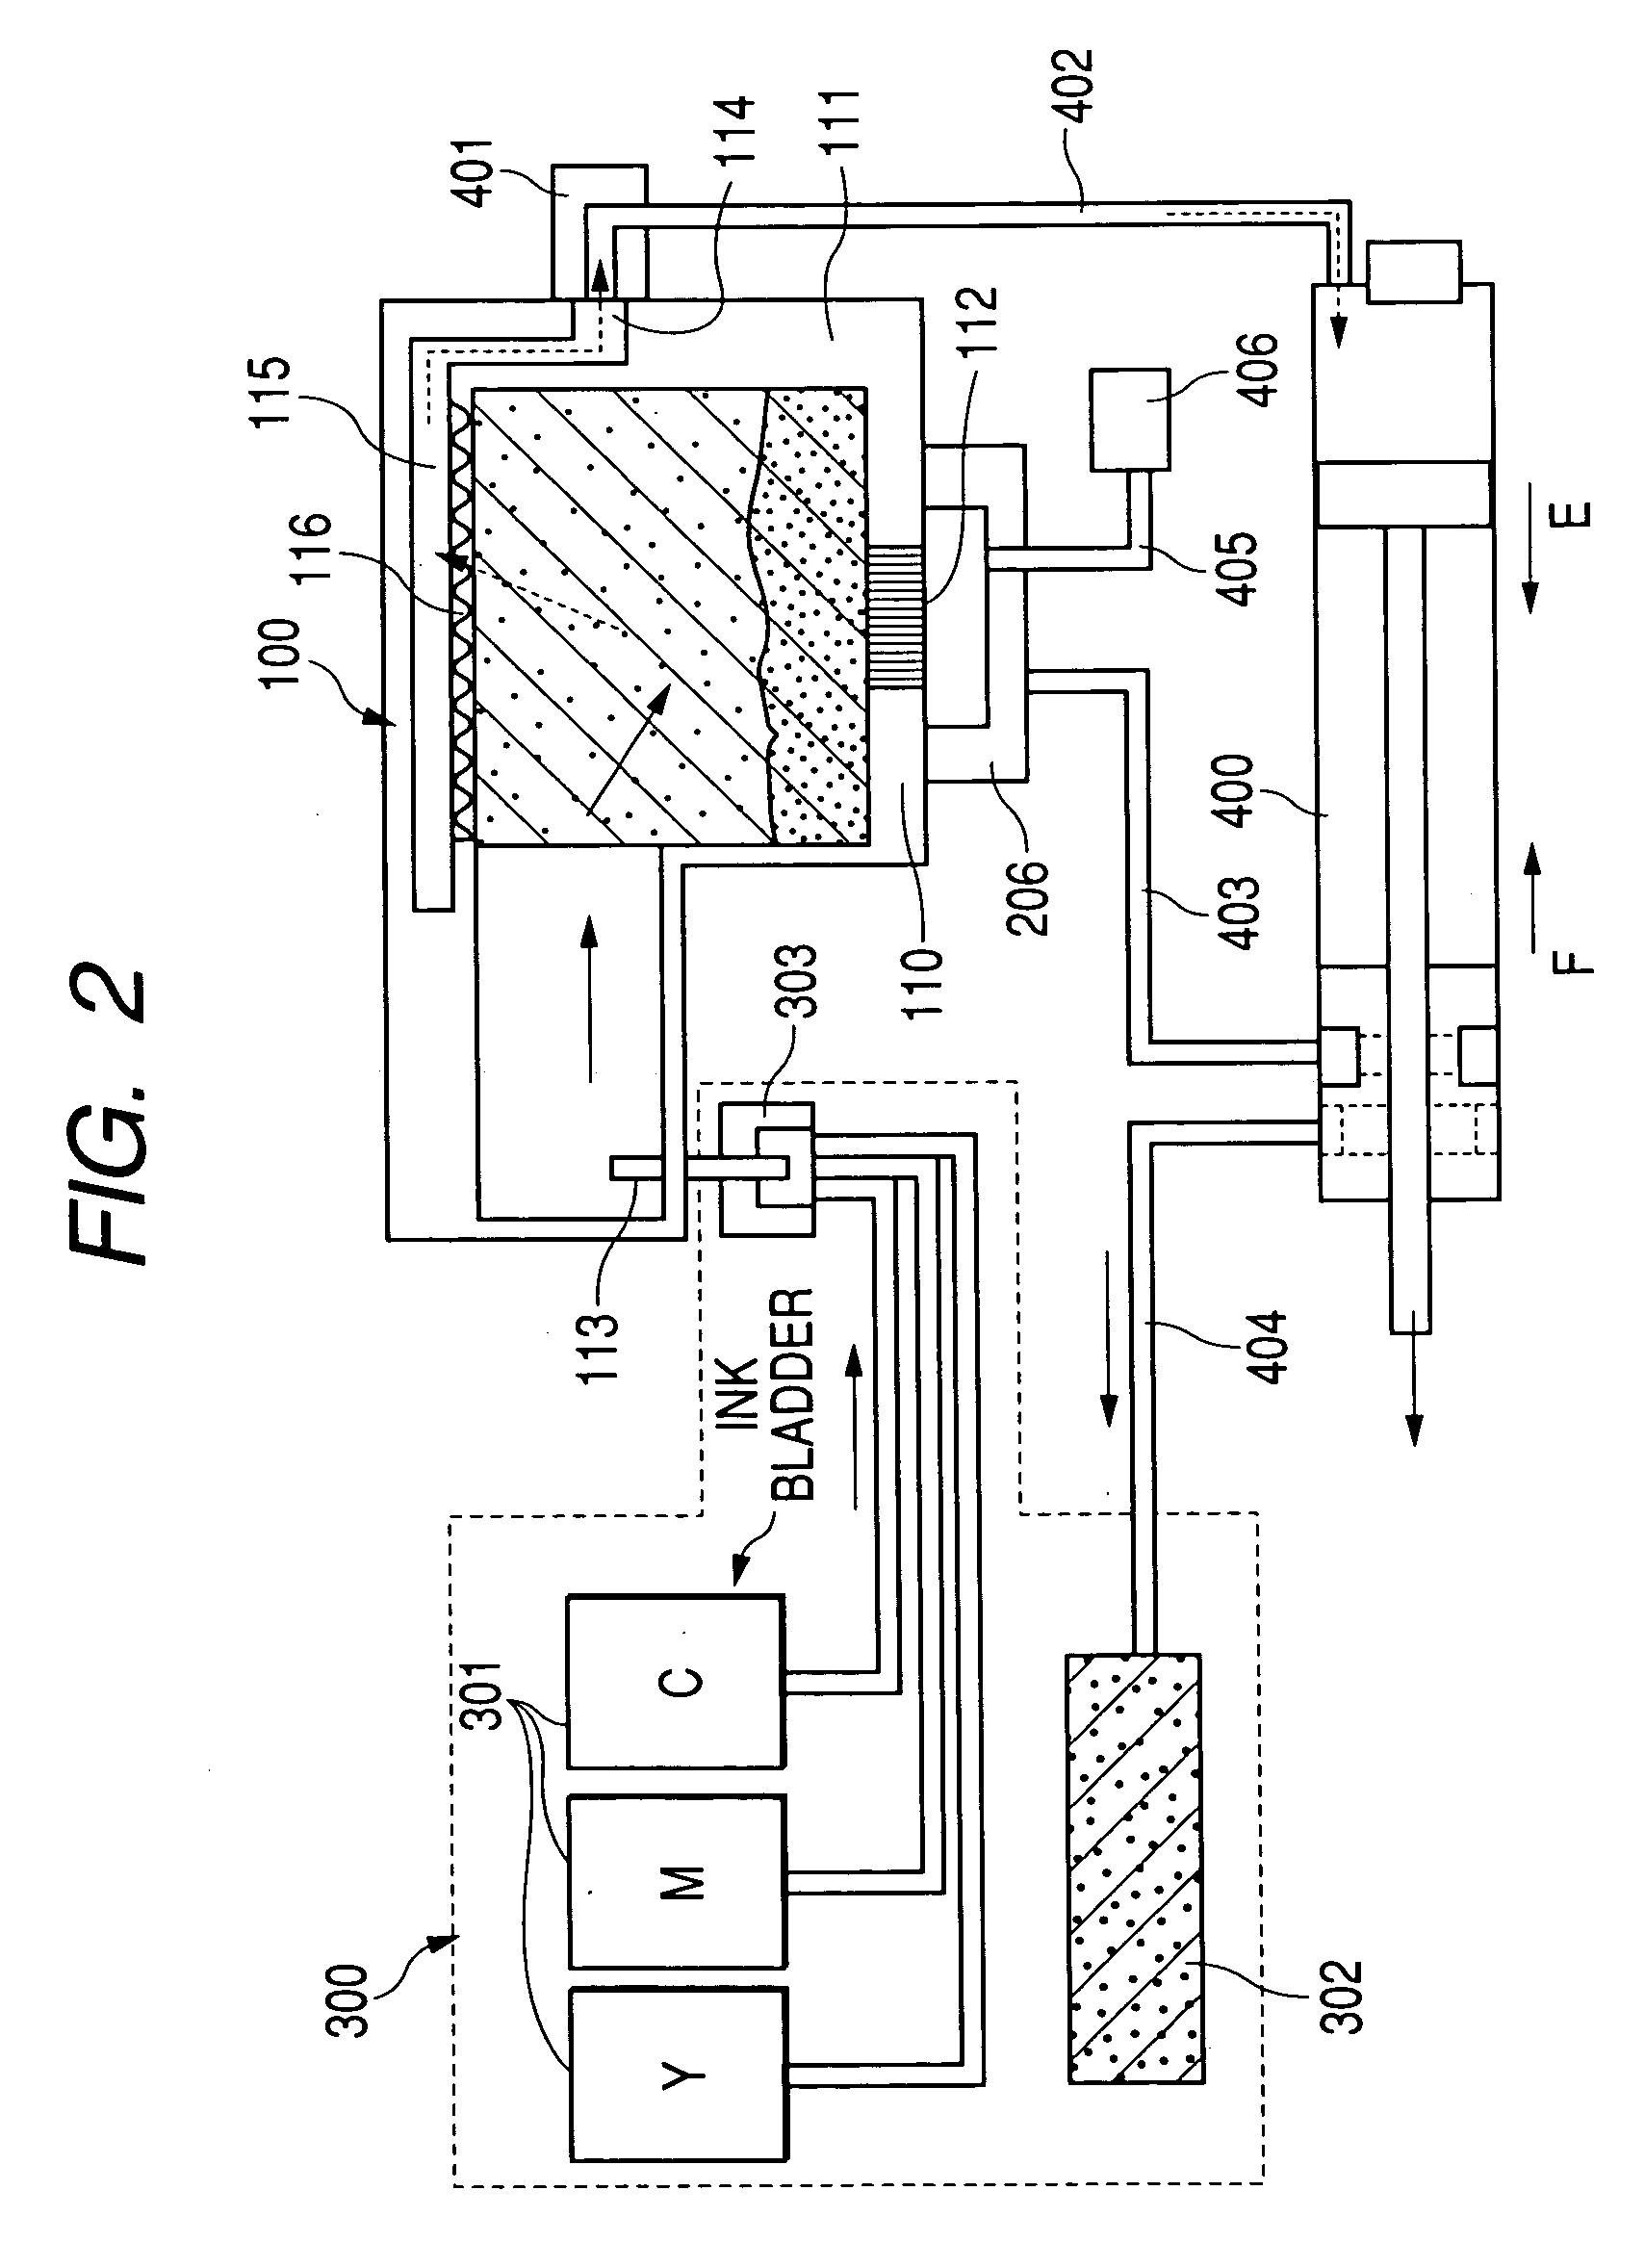 Ink jet recording apparatus and ink supply mechanism